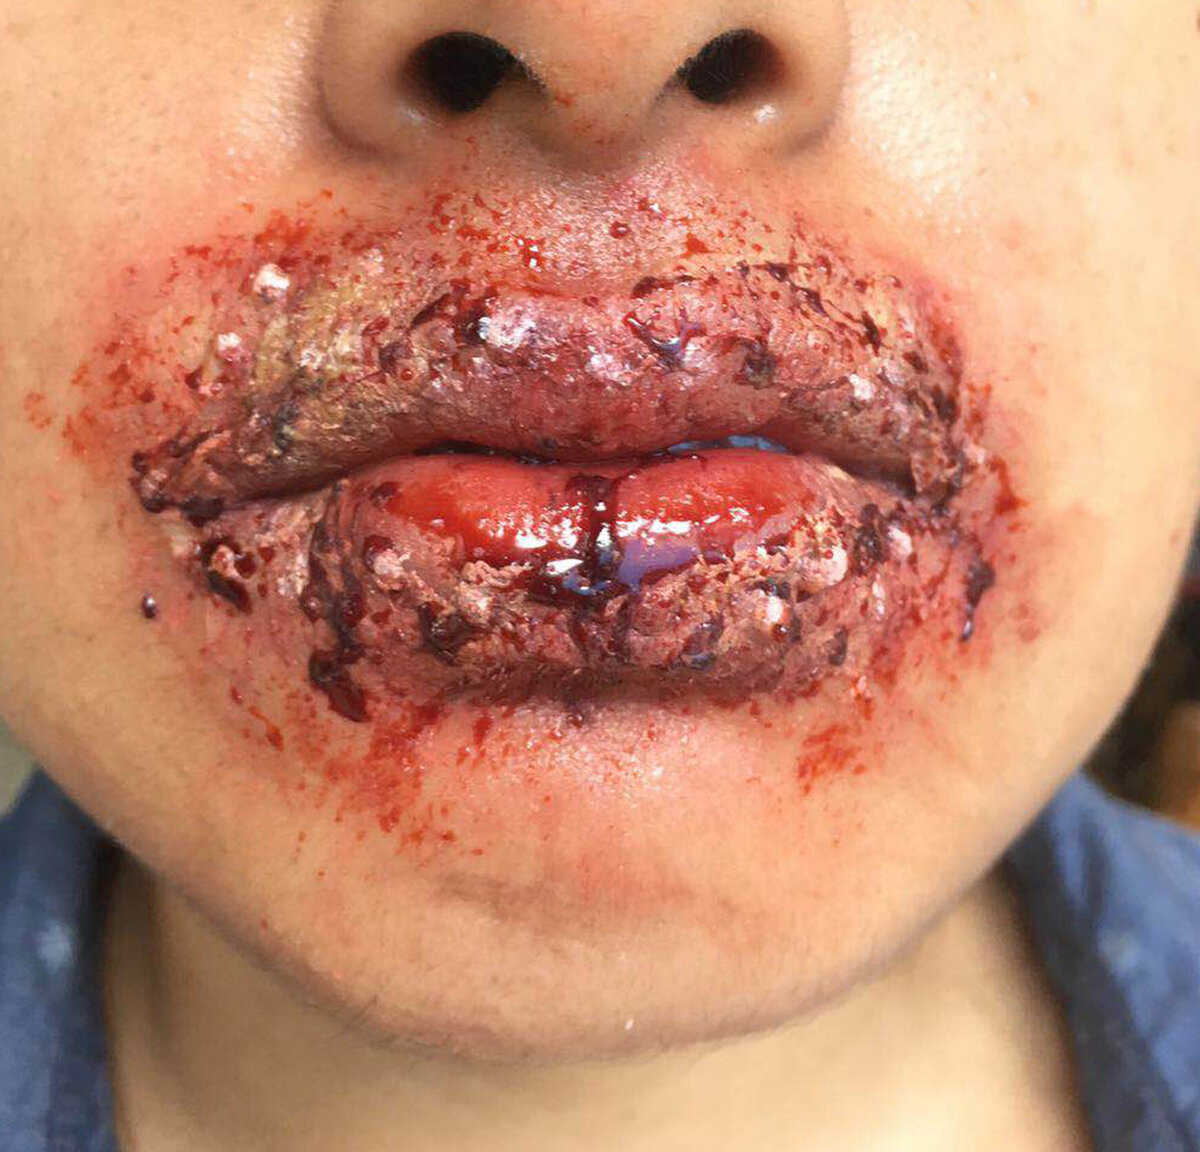 Special effects - blistered lips